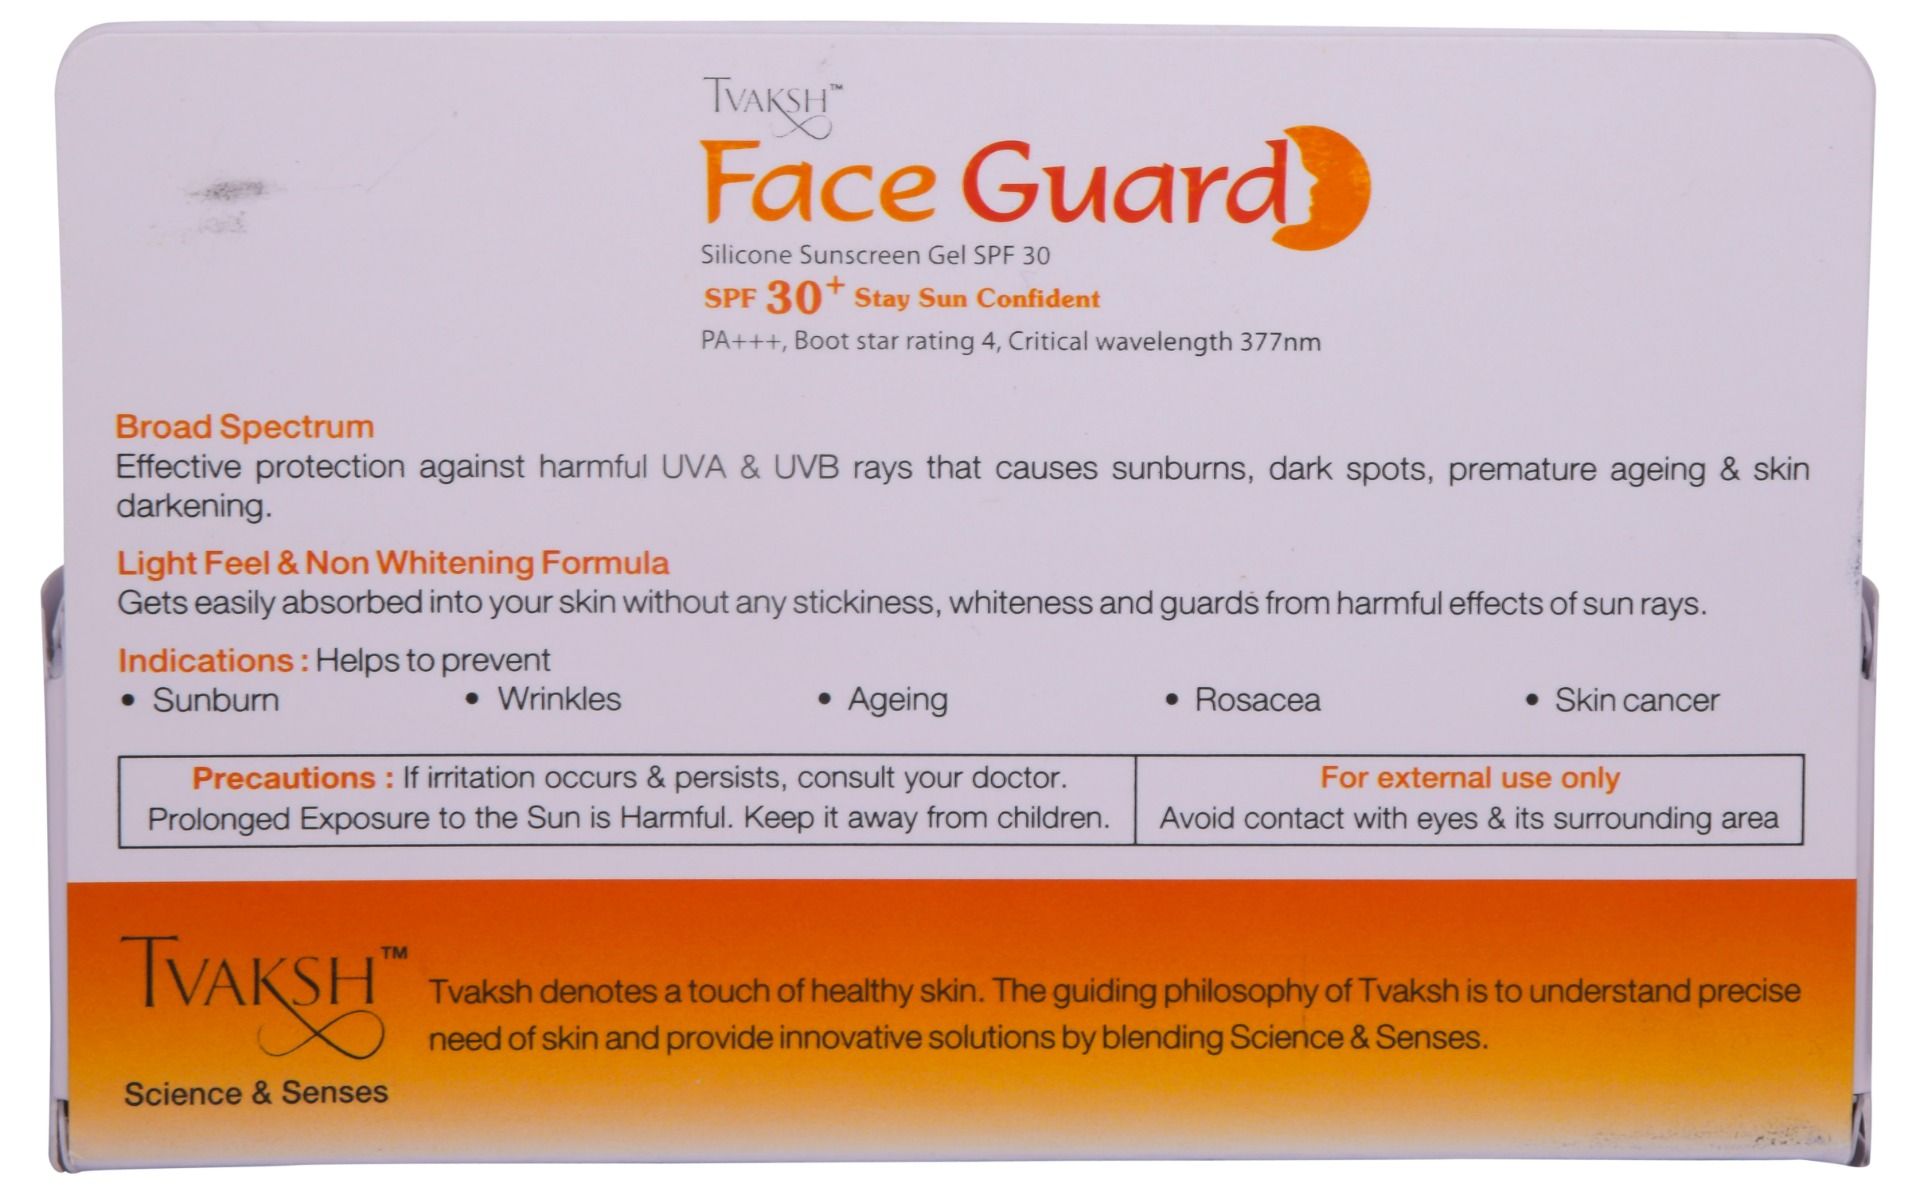 Tvaksh Face Guard SPF 30+ PA+++ Silicone Sunscreen Gel, 50 gm, Pack of 1 